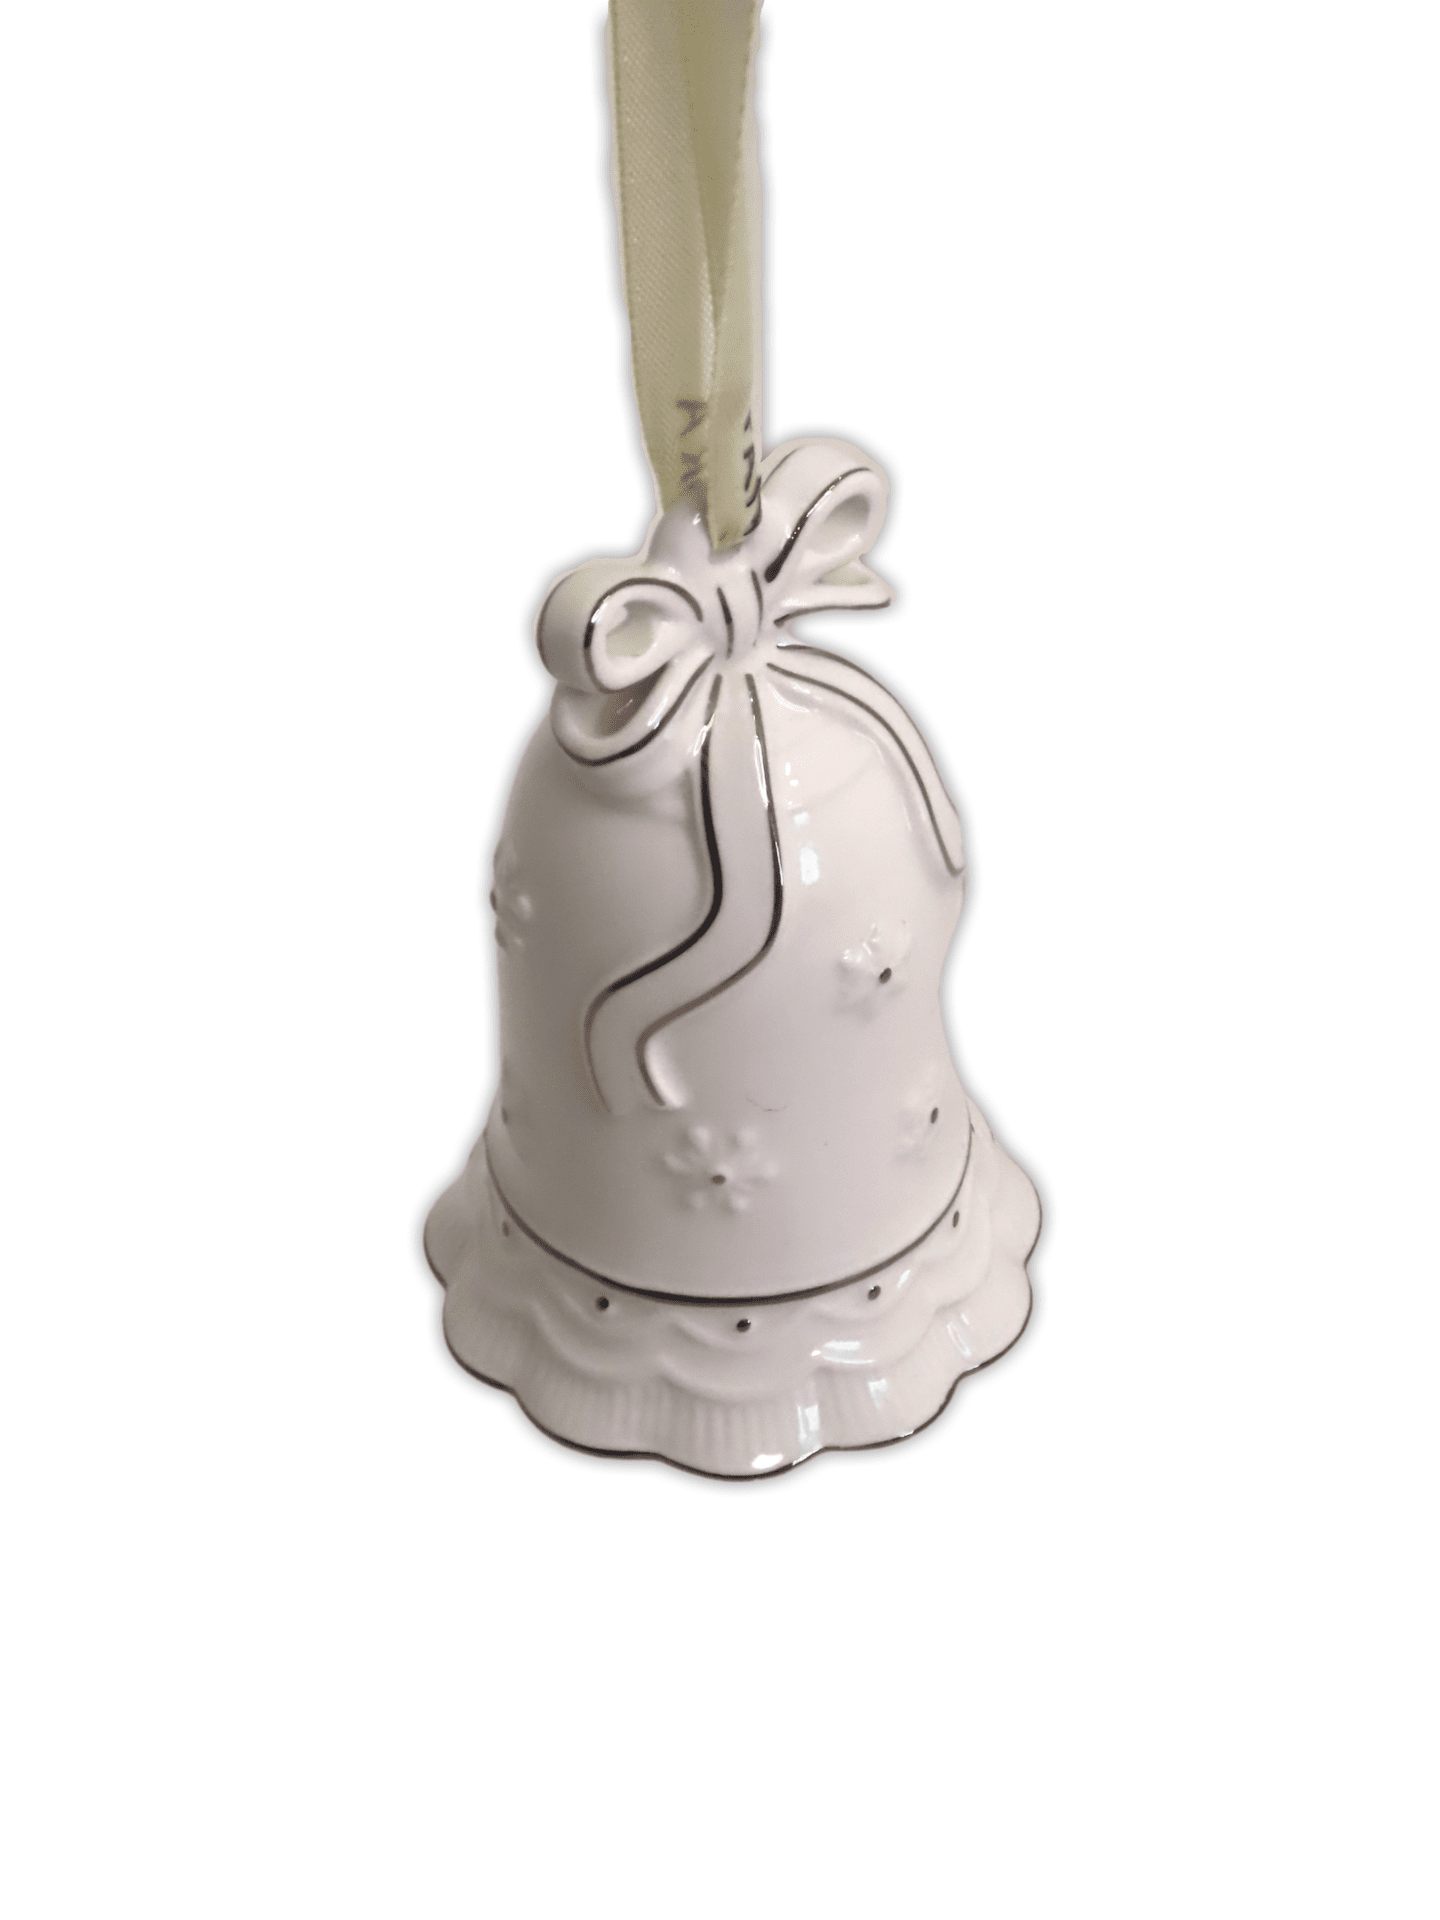 From Pandora, decorate your tree with this limited-edition, handmade bell ornament. White in color and made from porcelain. Light in weight with handmade designs.